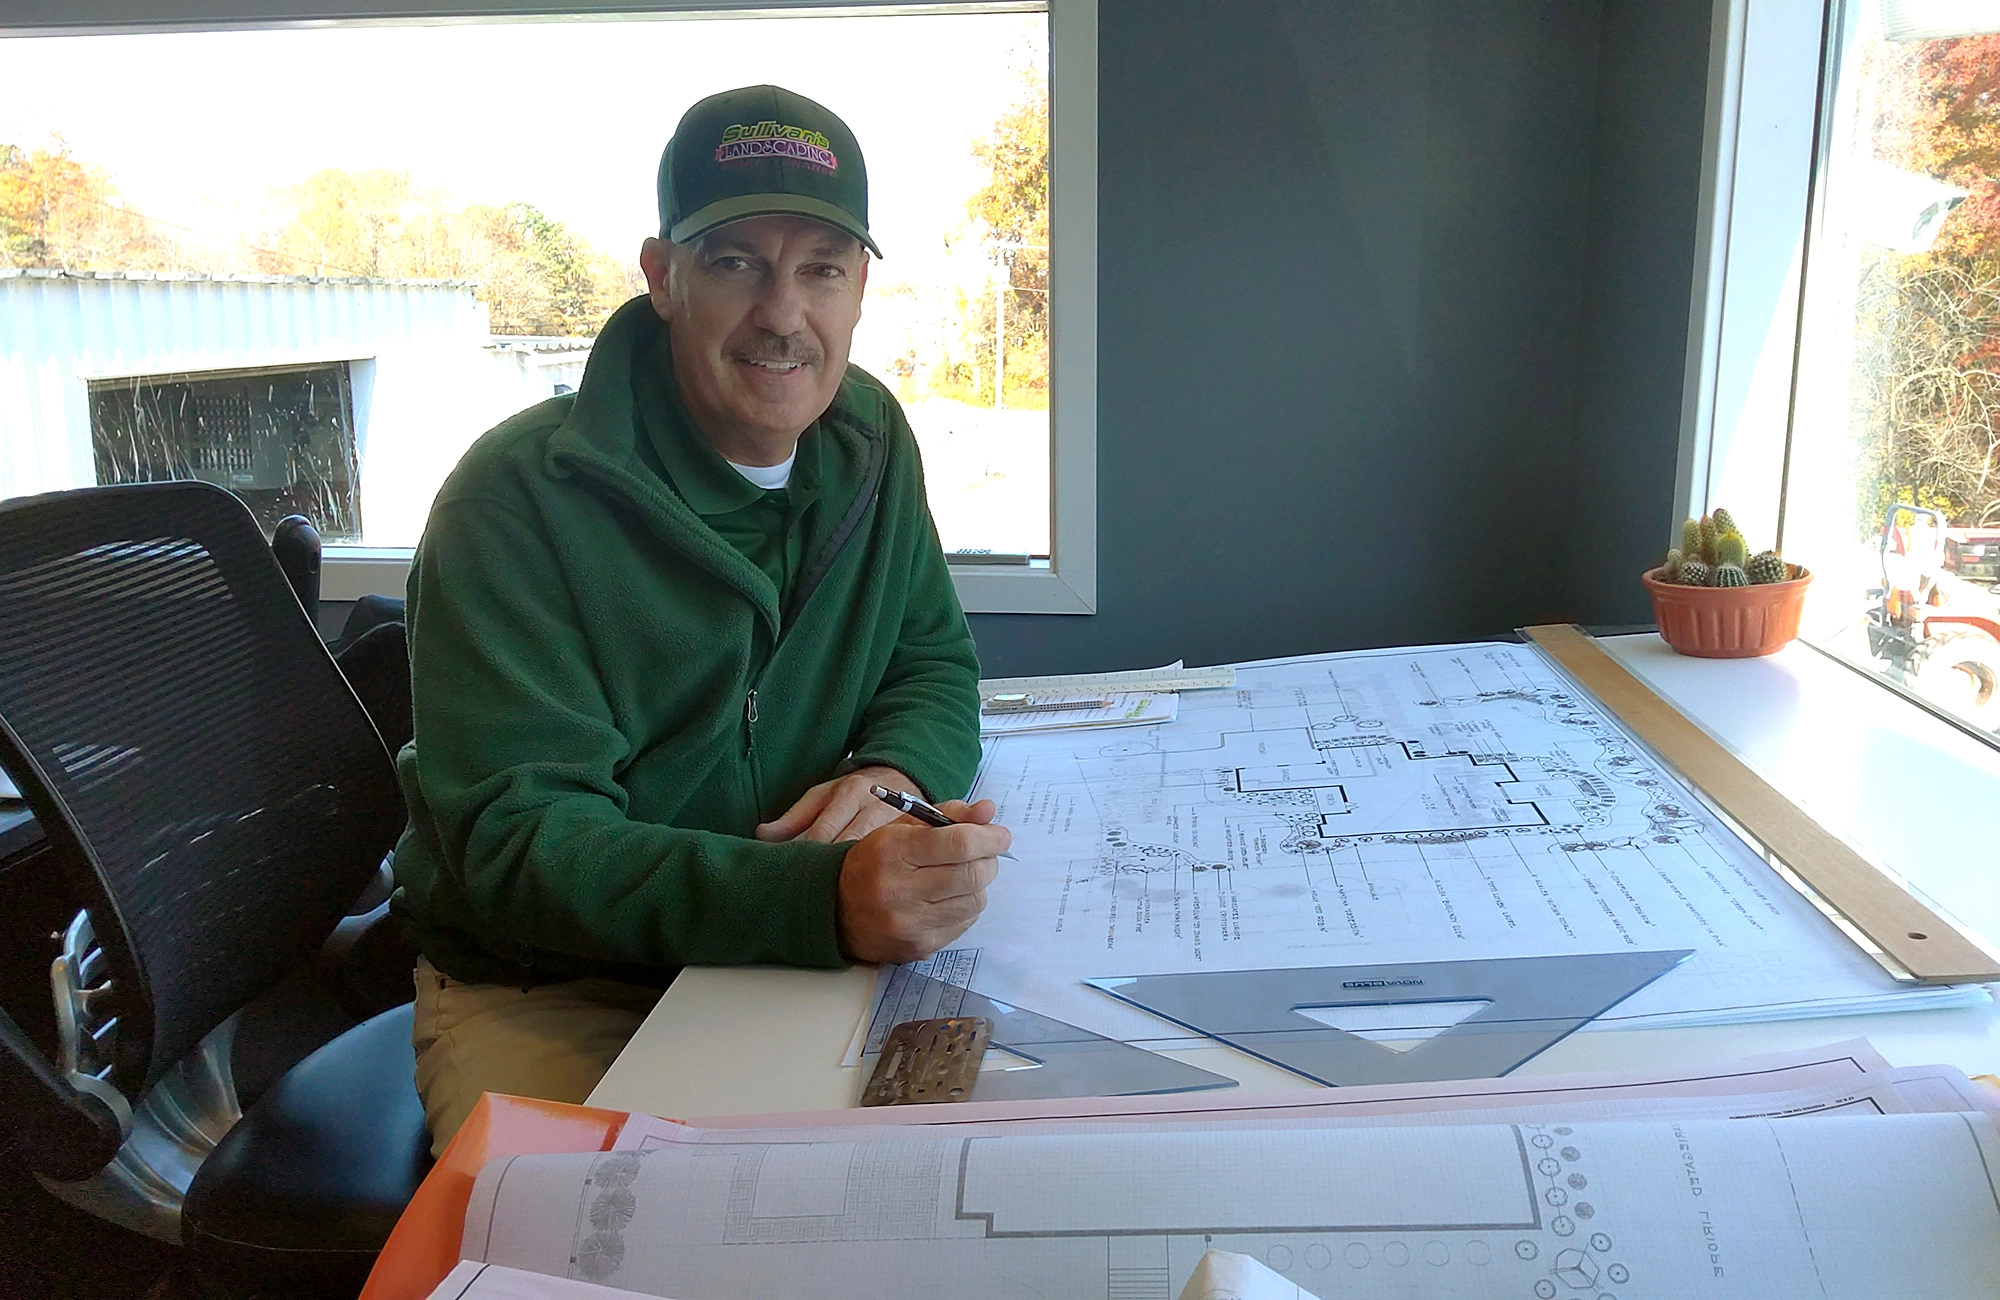 <h3>Landscape Design</h3>
<p>Thereafter your vision starts with traditional hand drawing skills by our very own in-house designer, Jim. Whether you're looking to revamp your entire landscape or just adding a new ornamental bed, Jim is committed to providing you with expert guidance and unparalleled service.</p>